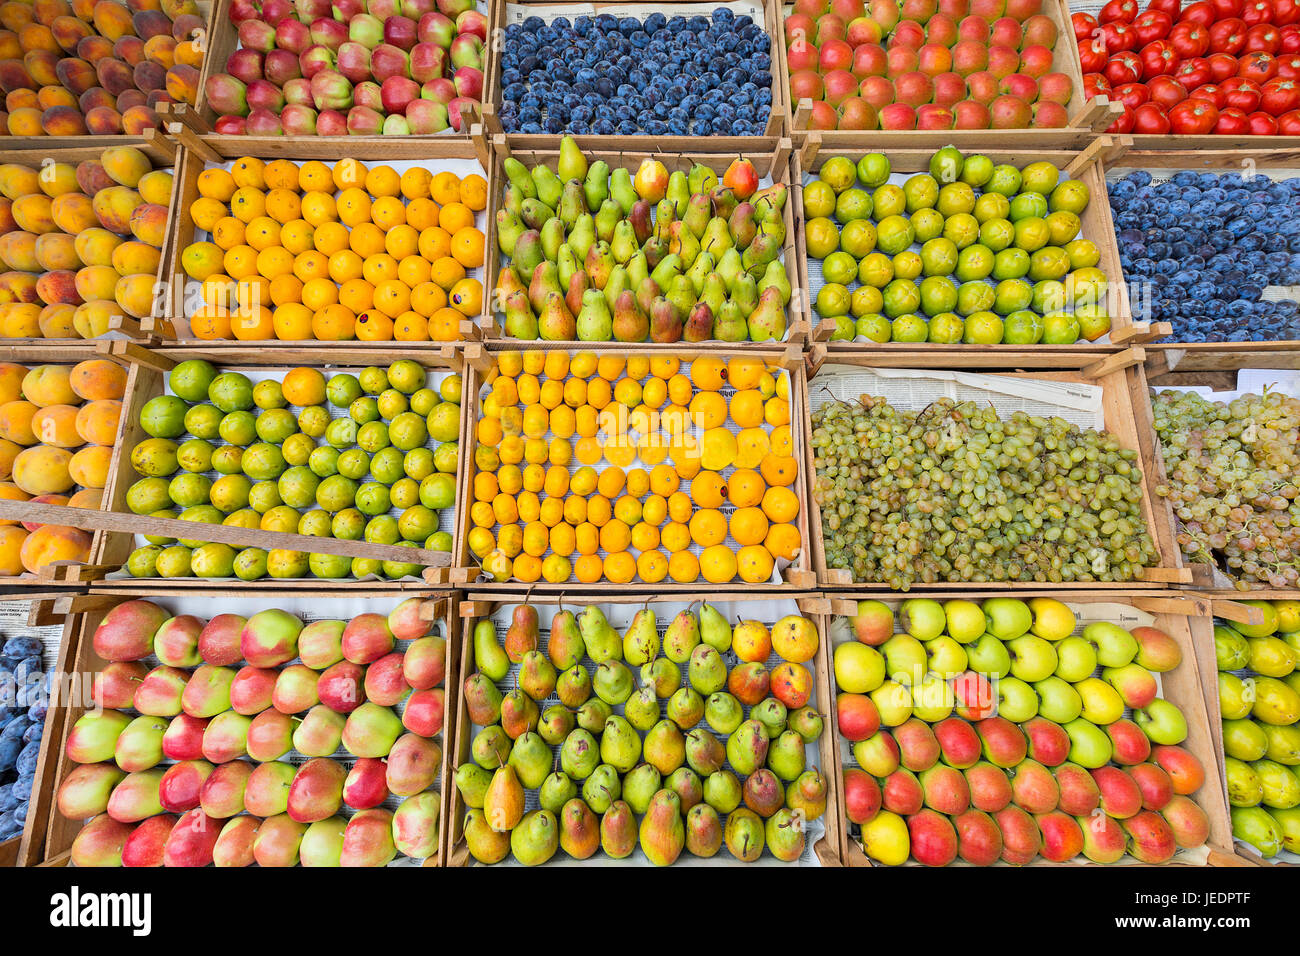 Obststand. Stockfoto